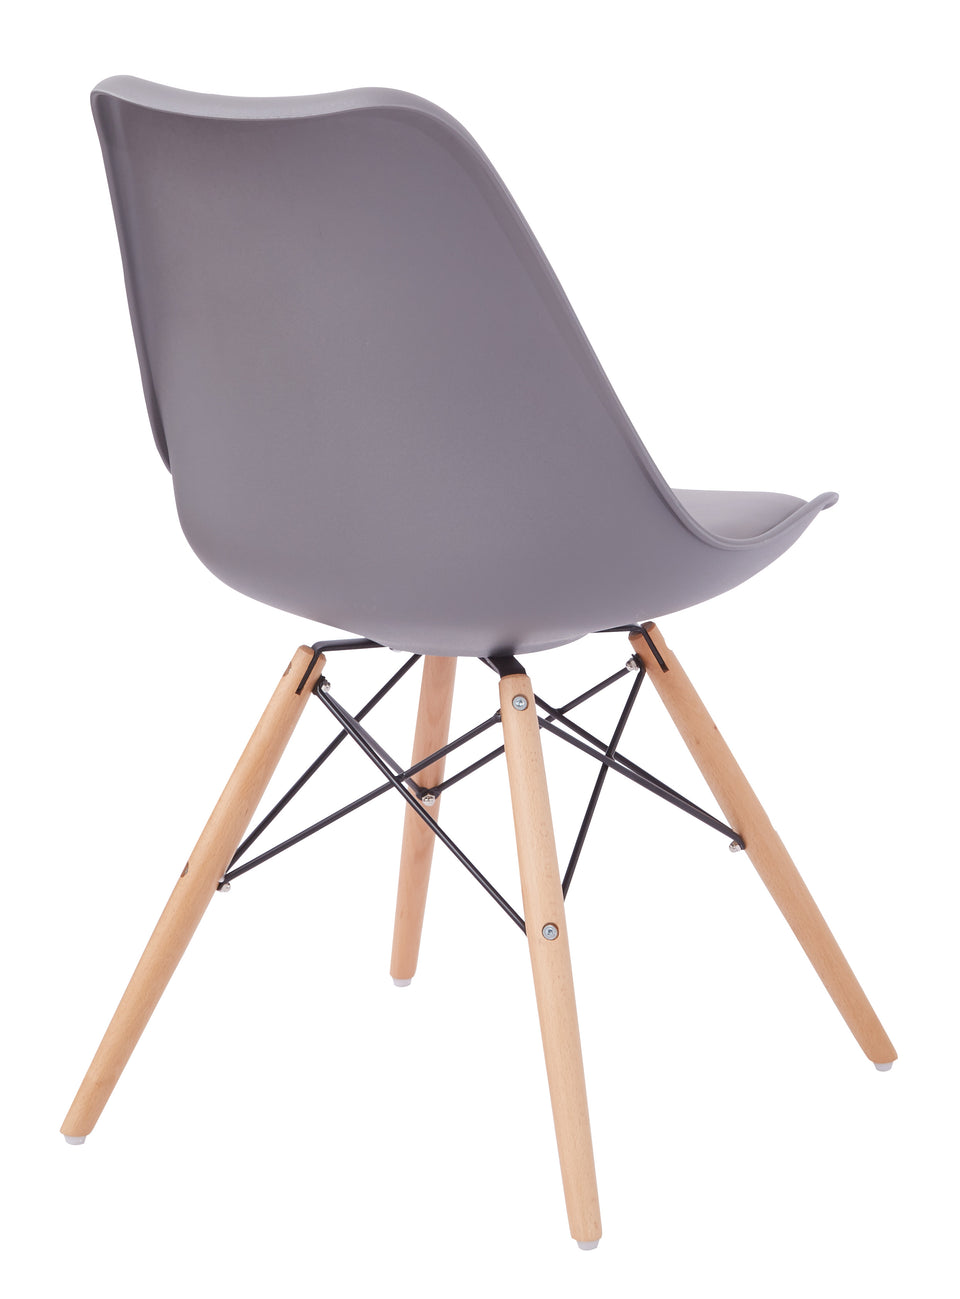 mid century modern aimes gray bucket chair with natural post legs scandinavian design inspired from decurban.com back angle view